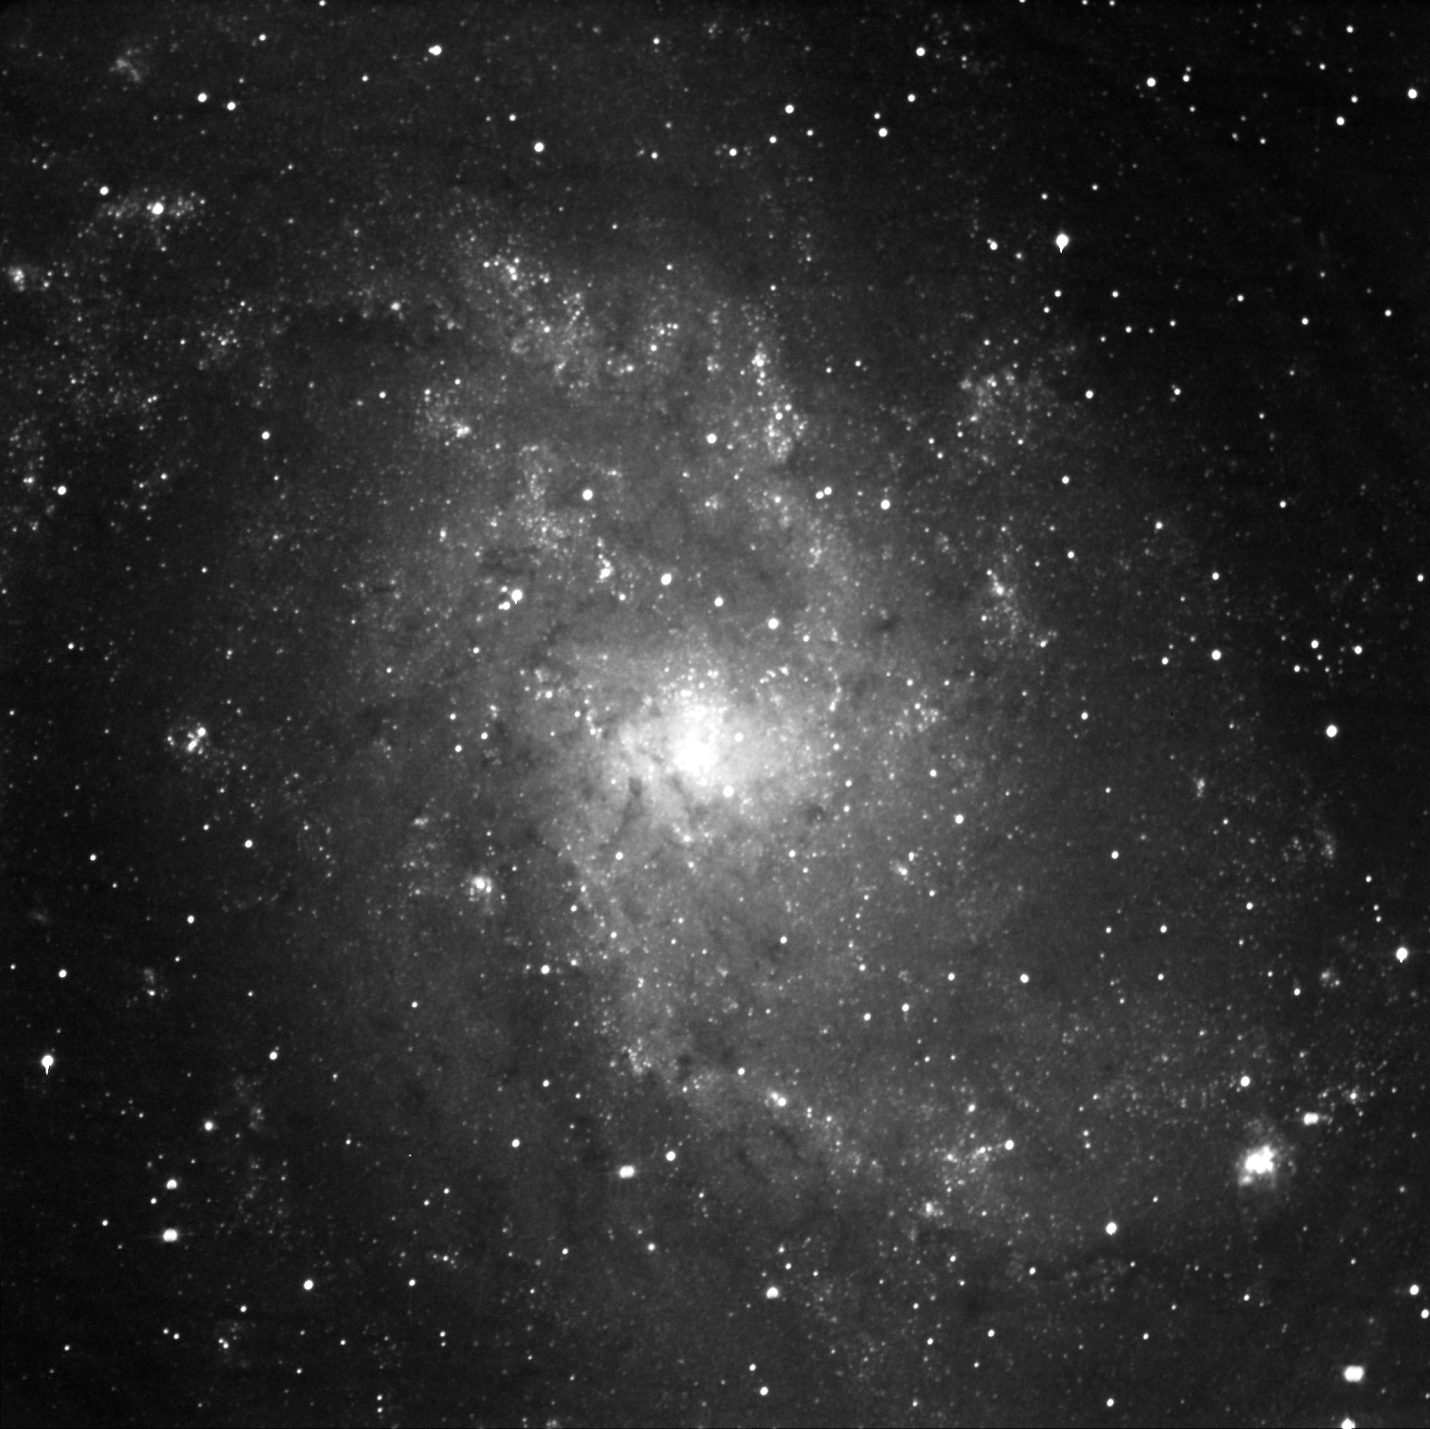 A black and white image depicting stars in the Triangulum Galaxy.